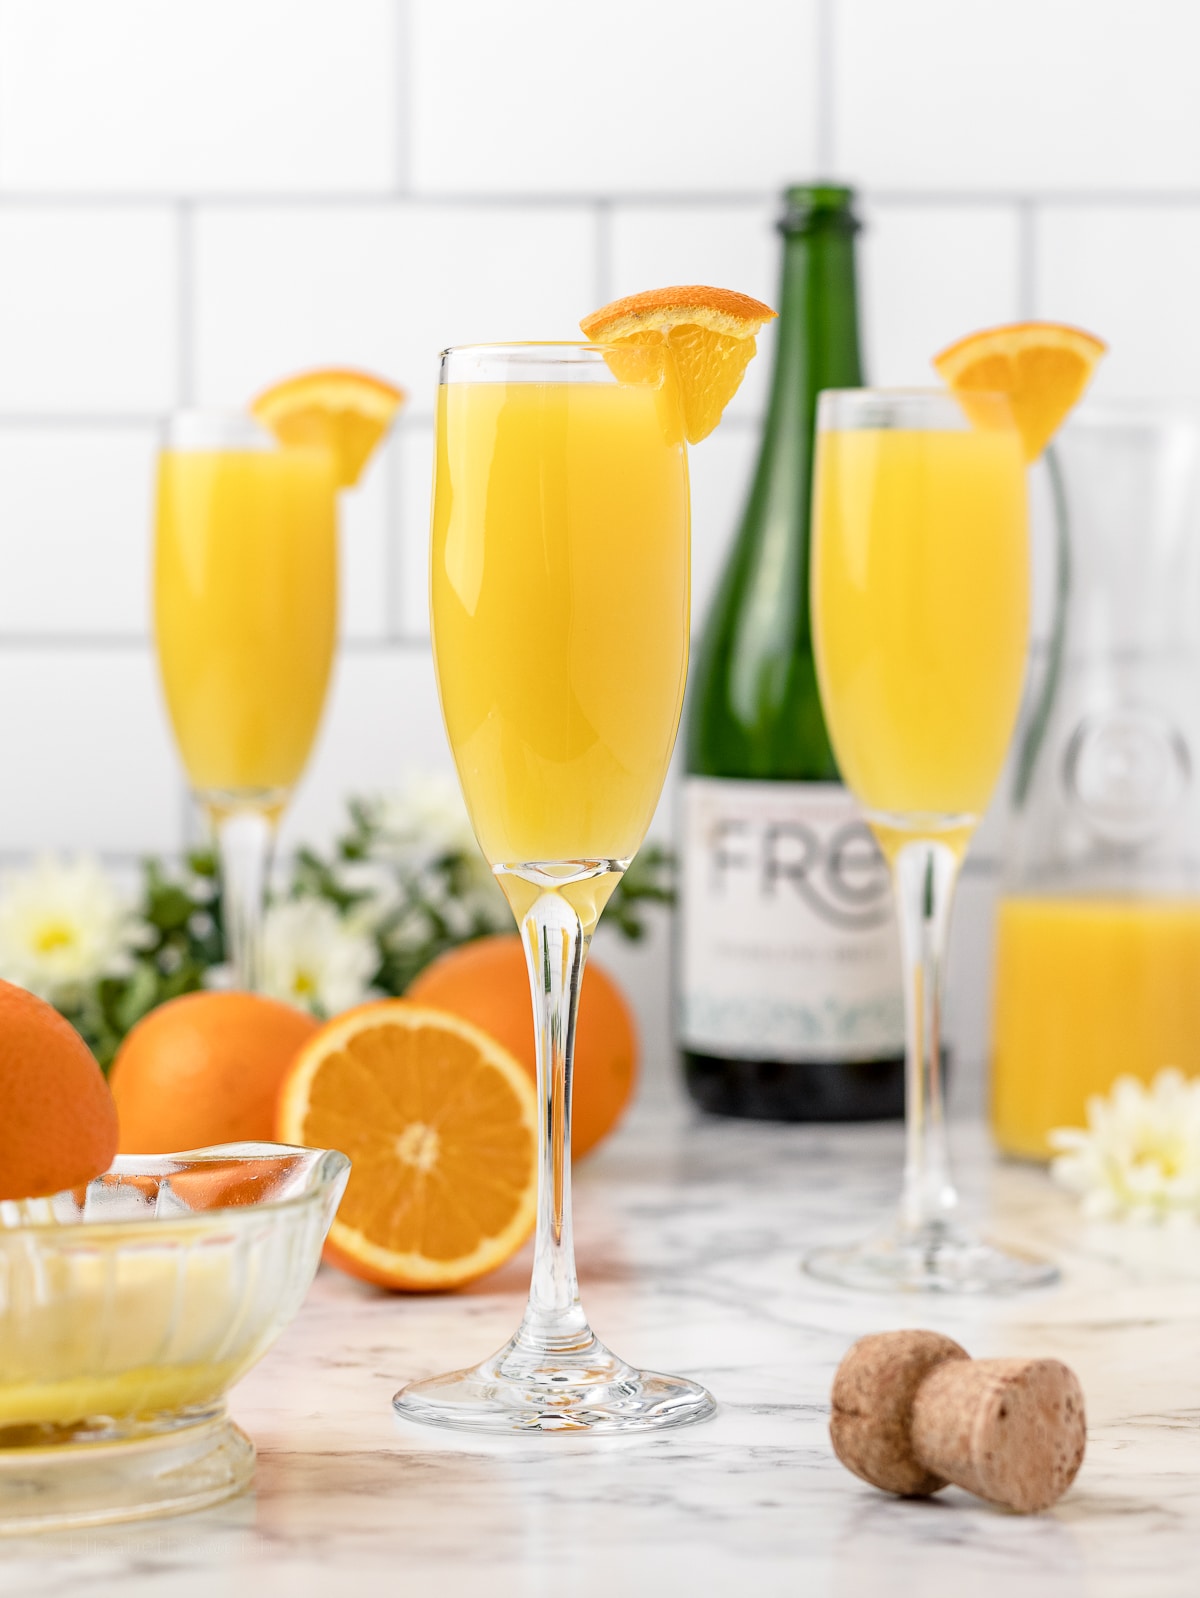 3 mimosas ready to drink with friends. More orange juice and non alcoholic champagne on the side.